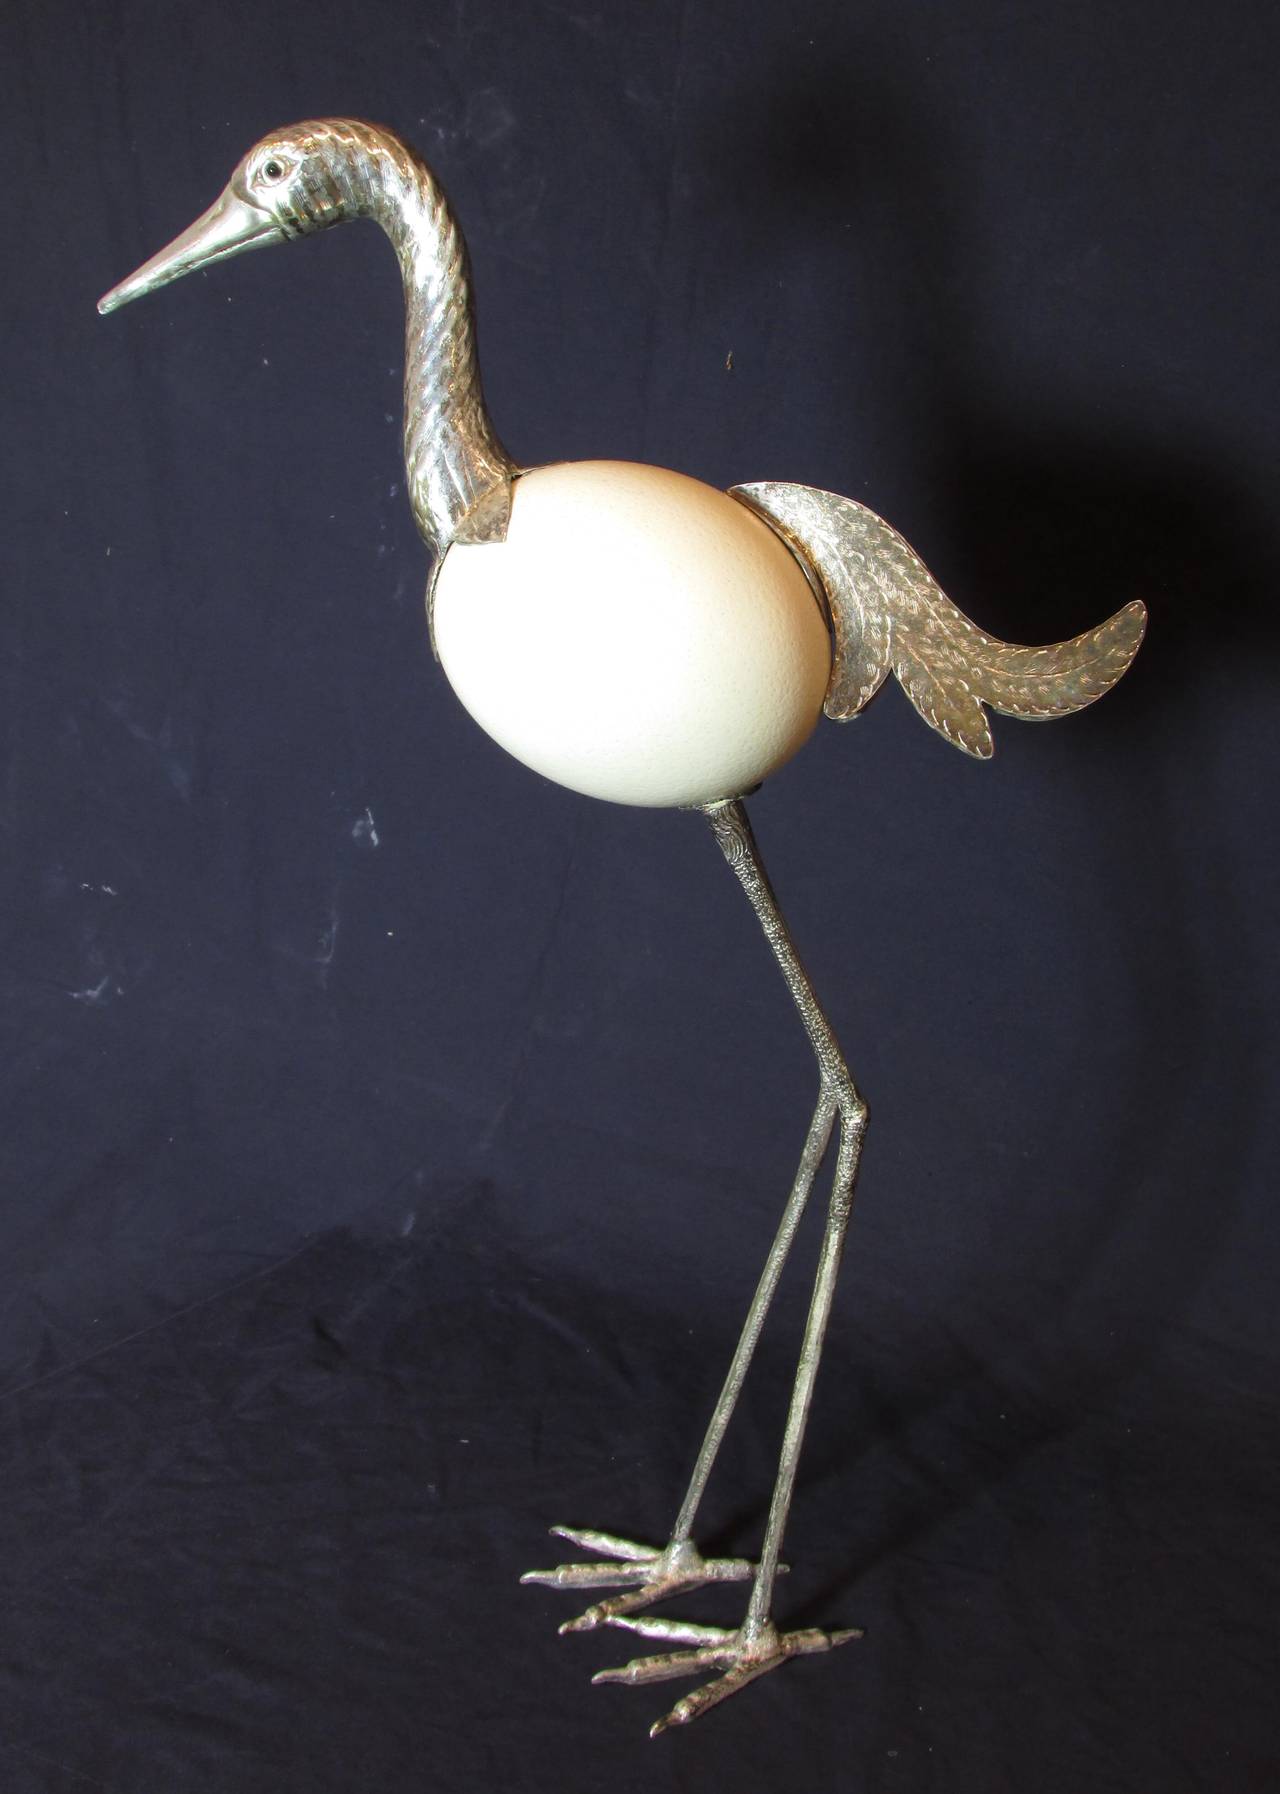 Tall crane bird sculpture made with body of ostrich egg and feet, tail and head is silver plated brass with glass eyes, unsigned in the style of Anthony Redmile & Binazzi Foresto